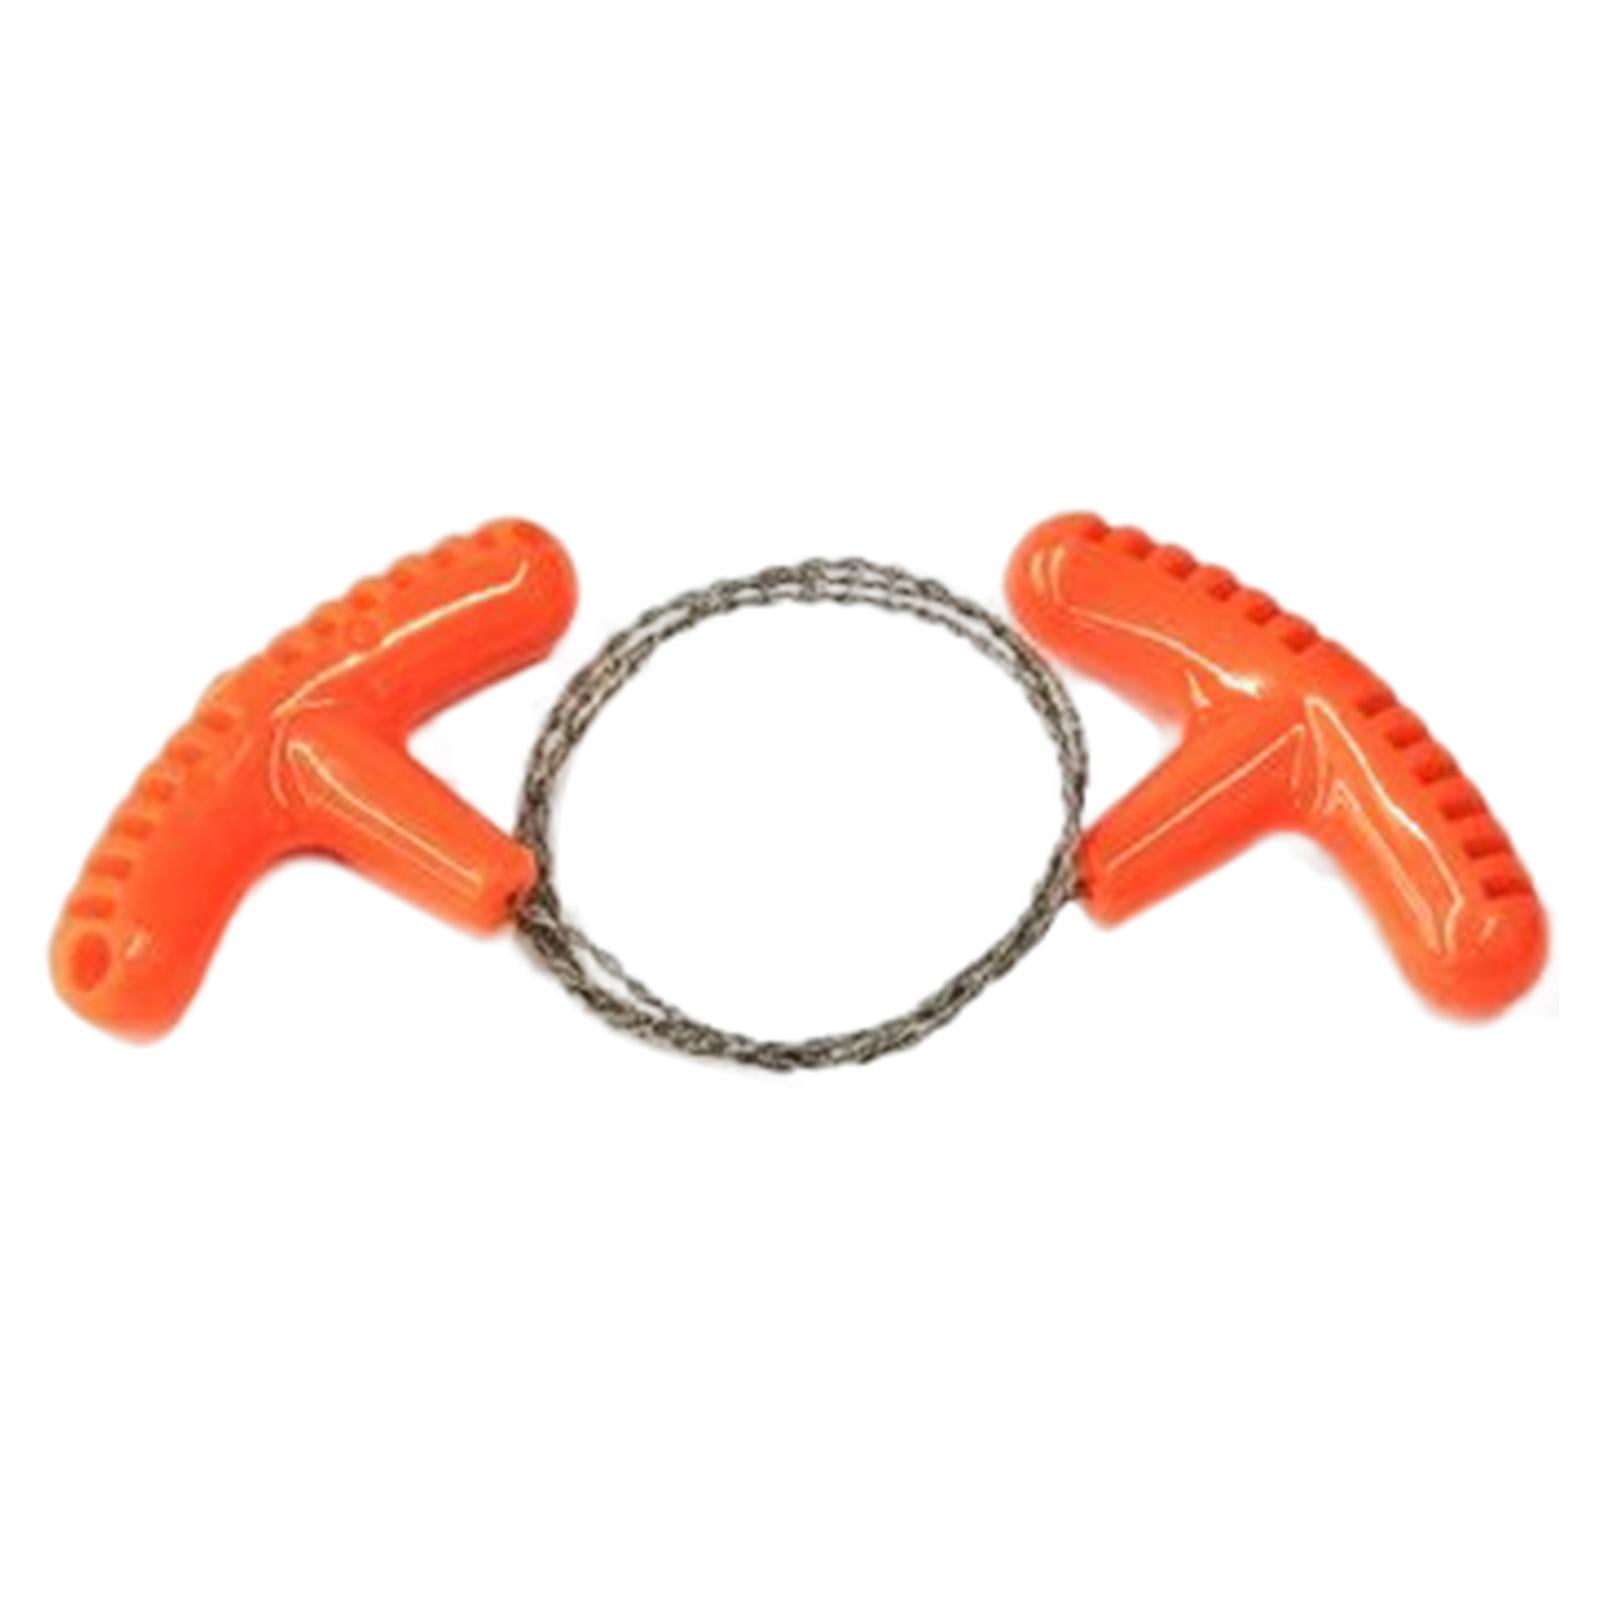 Safety  Stainless Steel Wire Saw Emergency Camping Hiking Survival Tools Orange 